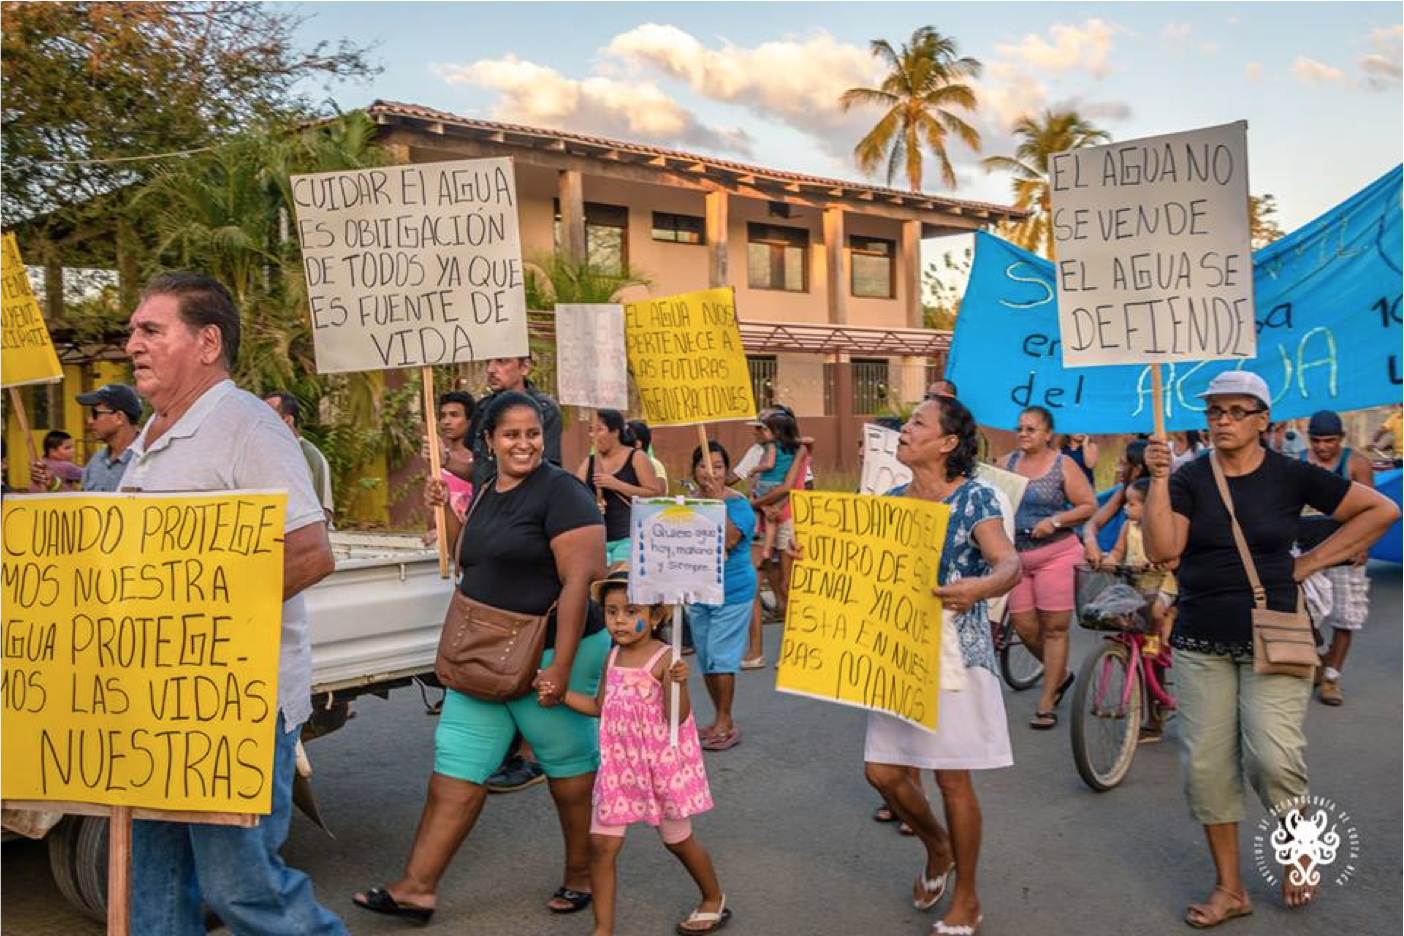 Adults and children march down a street carrying signs in a protest to protect water